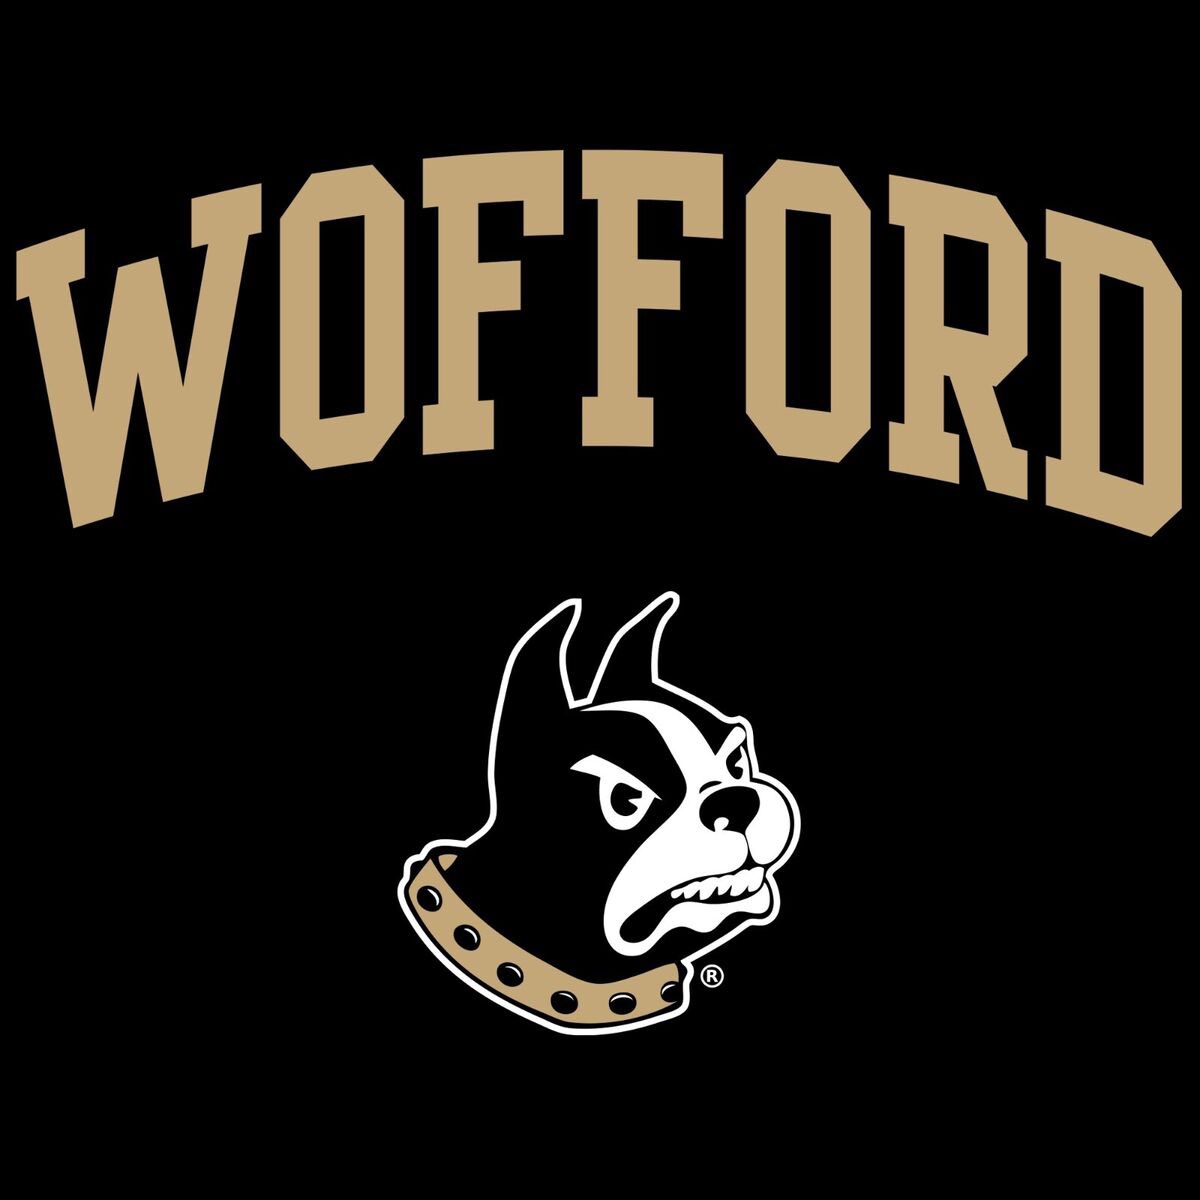 After a great conversation with @Coachsax72 , I am blessed to receive an offer from Wofford College. @Wofford_FB @WatsonShawn1 @CoachWatson_24 @Bolles_Football @DeshawnBrownInc @bhernyscoutguy